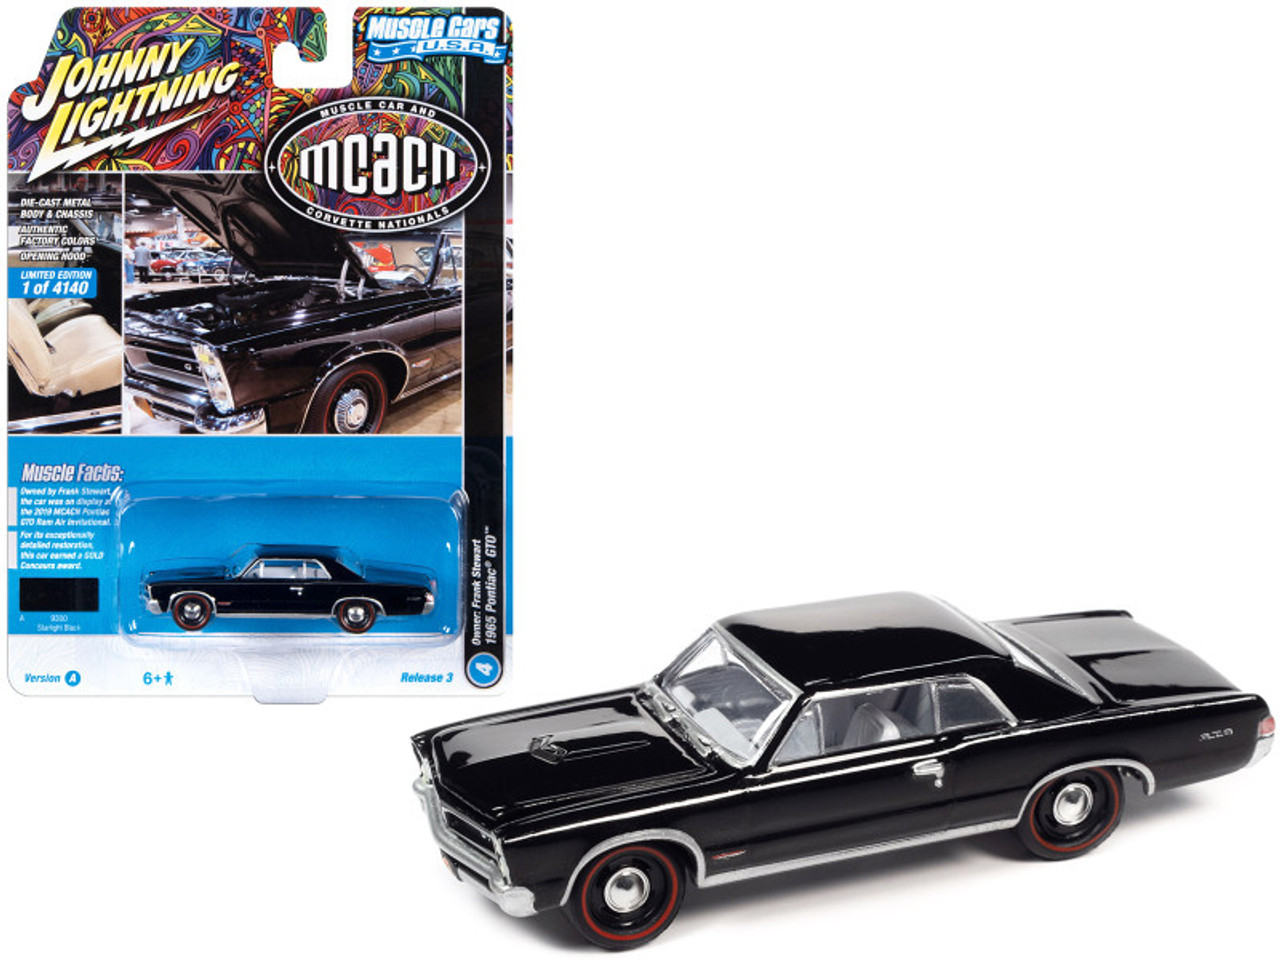 1965 Pontiac GTO Starlight Black with White Interior "MCACN (Muscle Car and Corvette Nationals)" Limited Edition to 4140 pieces Worldwide "Muscle Cars USA" Series 1/64 Diecast Model Car by Johnny Lightning